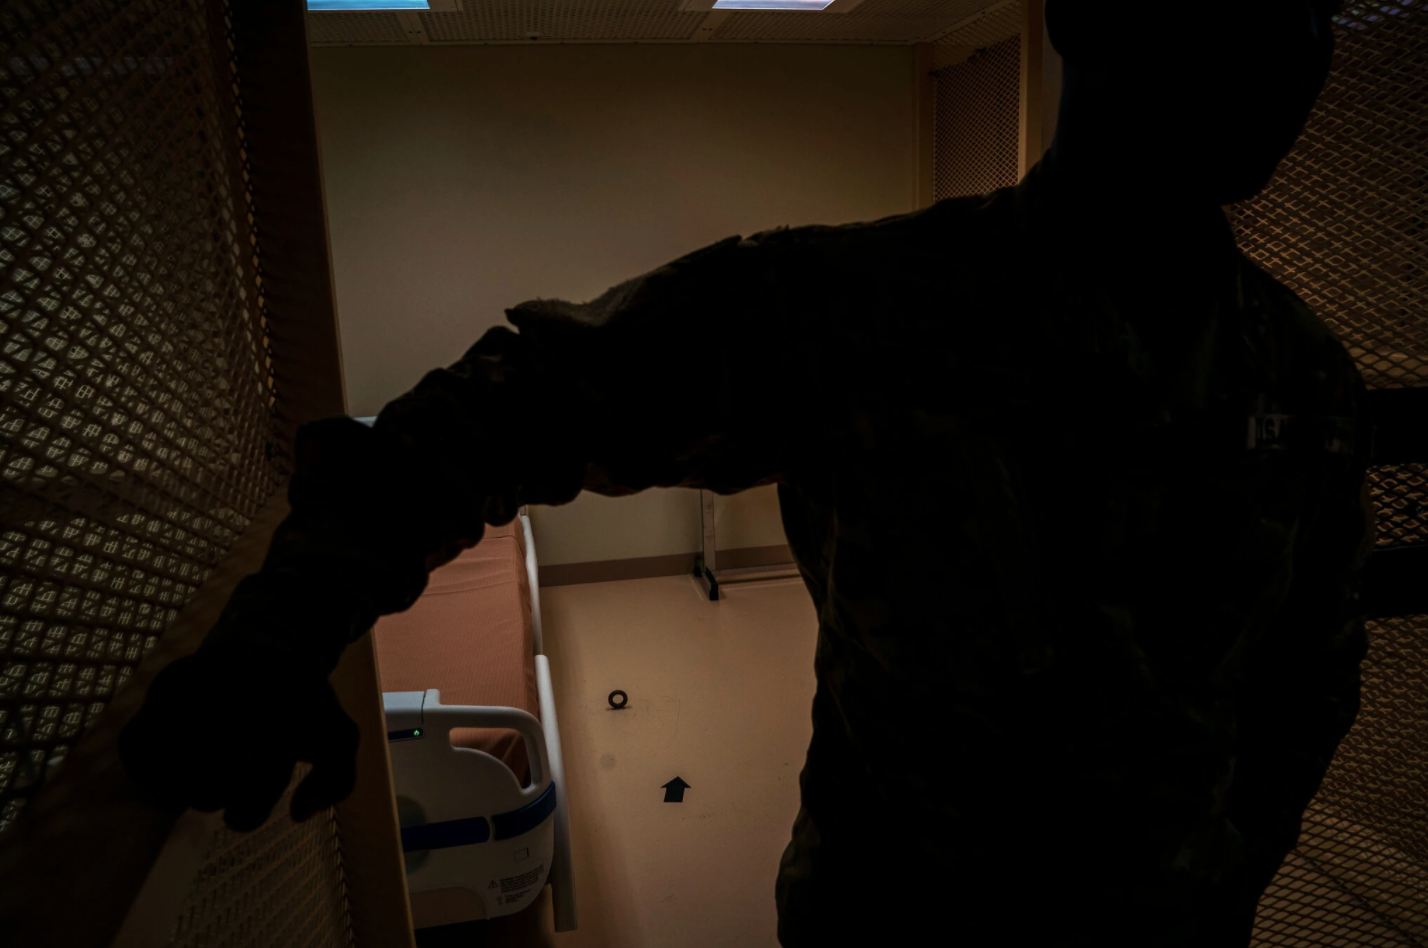 A hospital room at Guantánamo Bay includes a shackle point in the floor and an arrow pointing to Mecca. By law, detainees must receive all their medical care on the base. Image by Doug Mills/The New York Times. United States, undated.